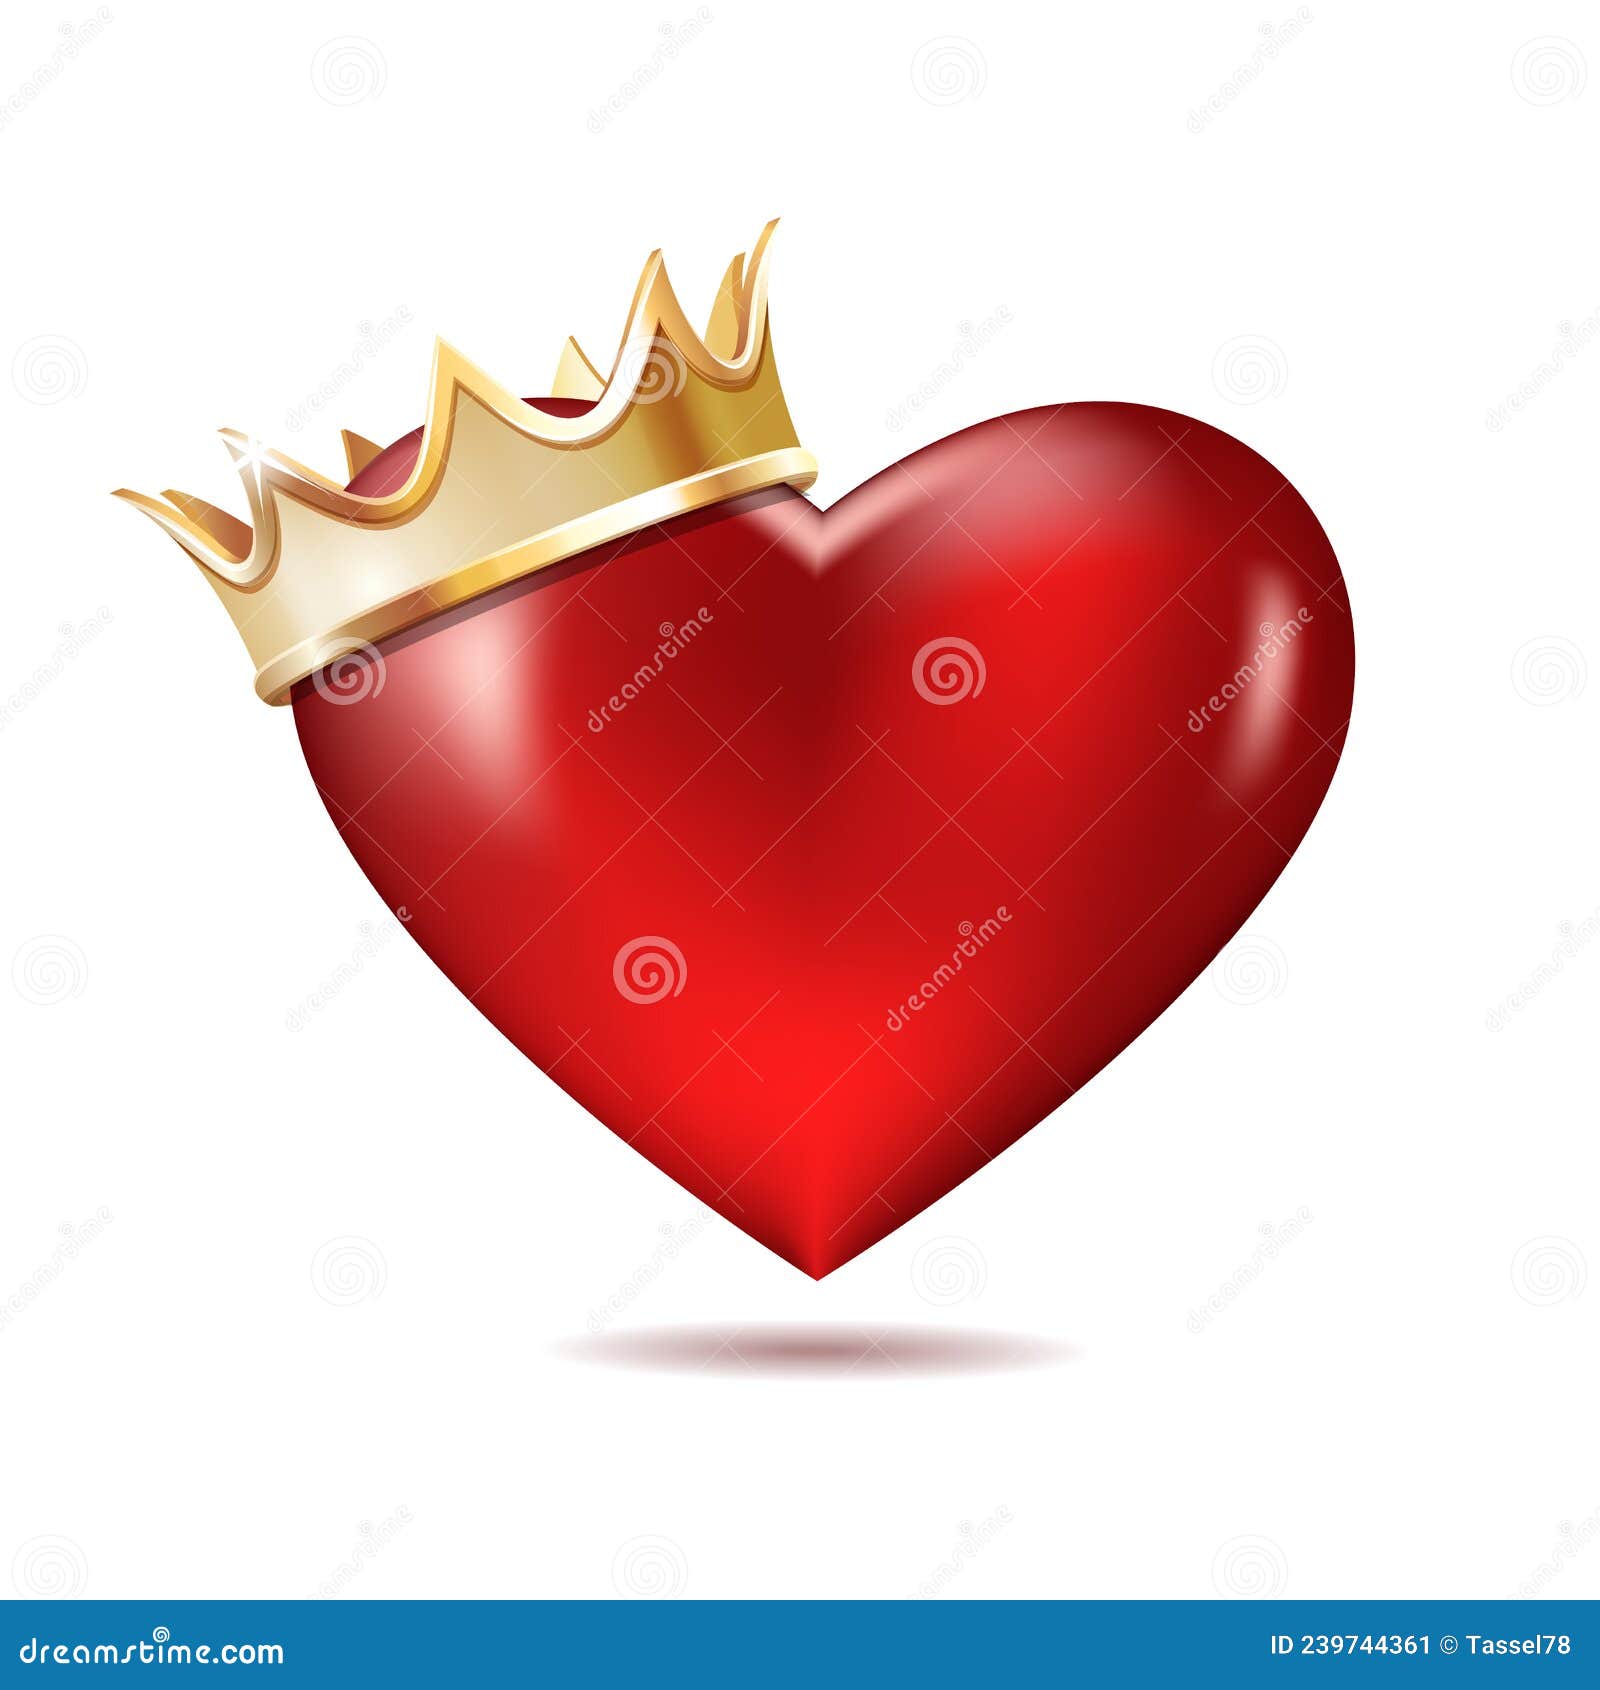 Elegant p logo with crown and love shape heart Vector Image